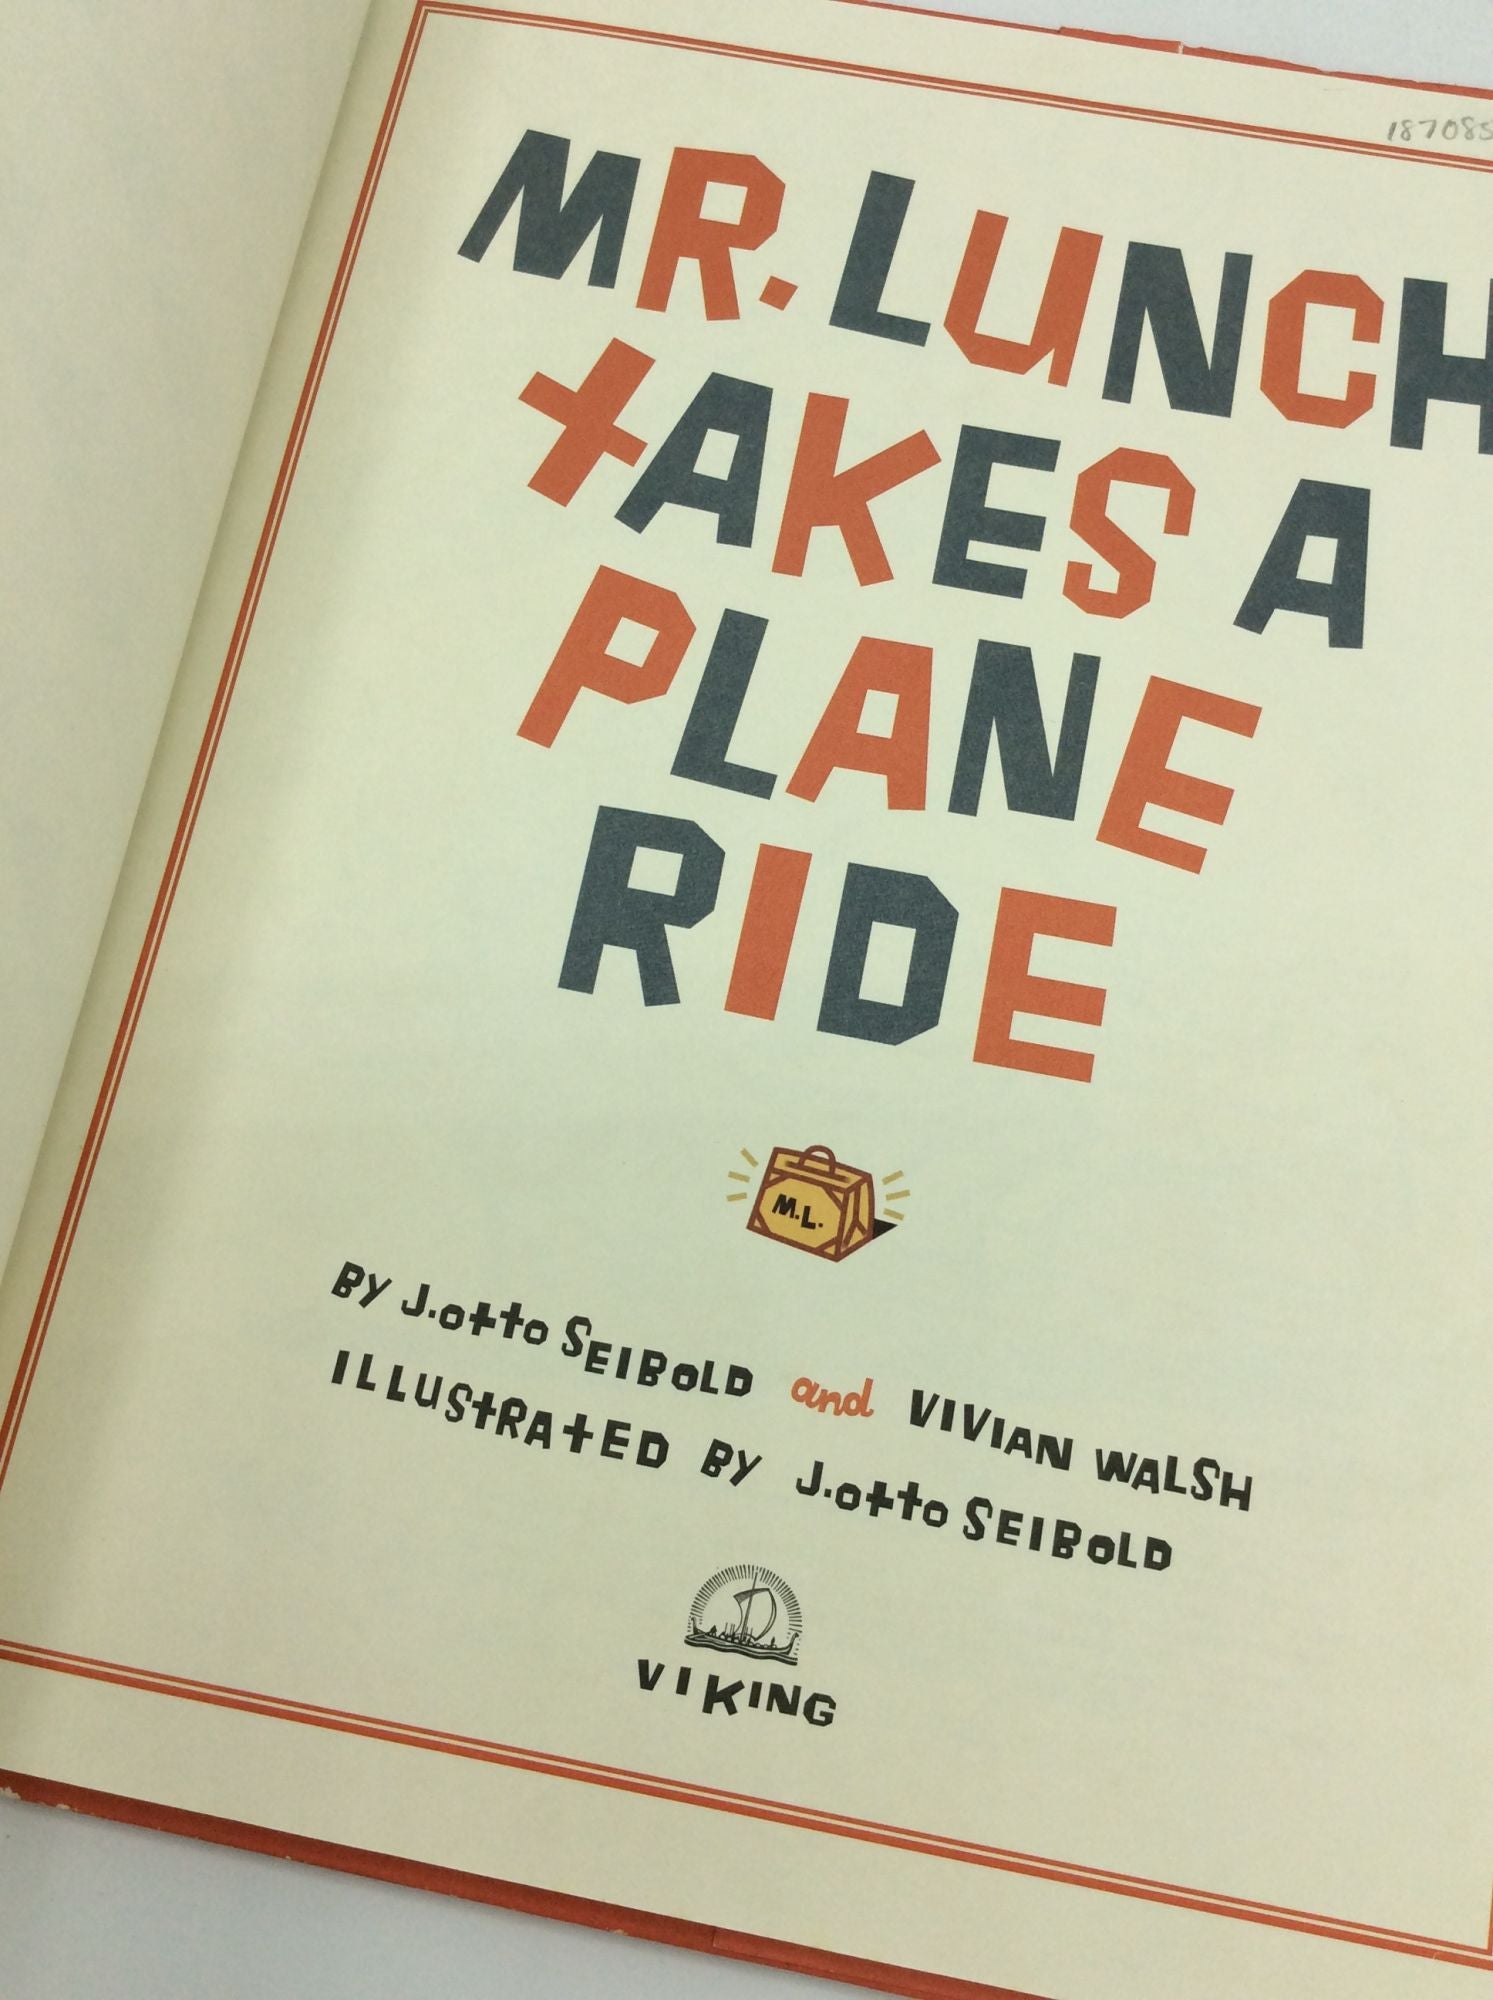 MR. LUNCH TAKES A PLANE RIDE by J. Otto Seibold